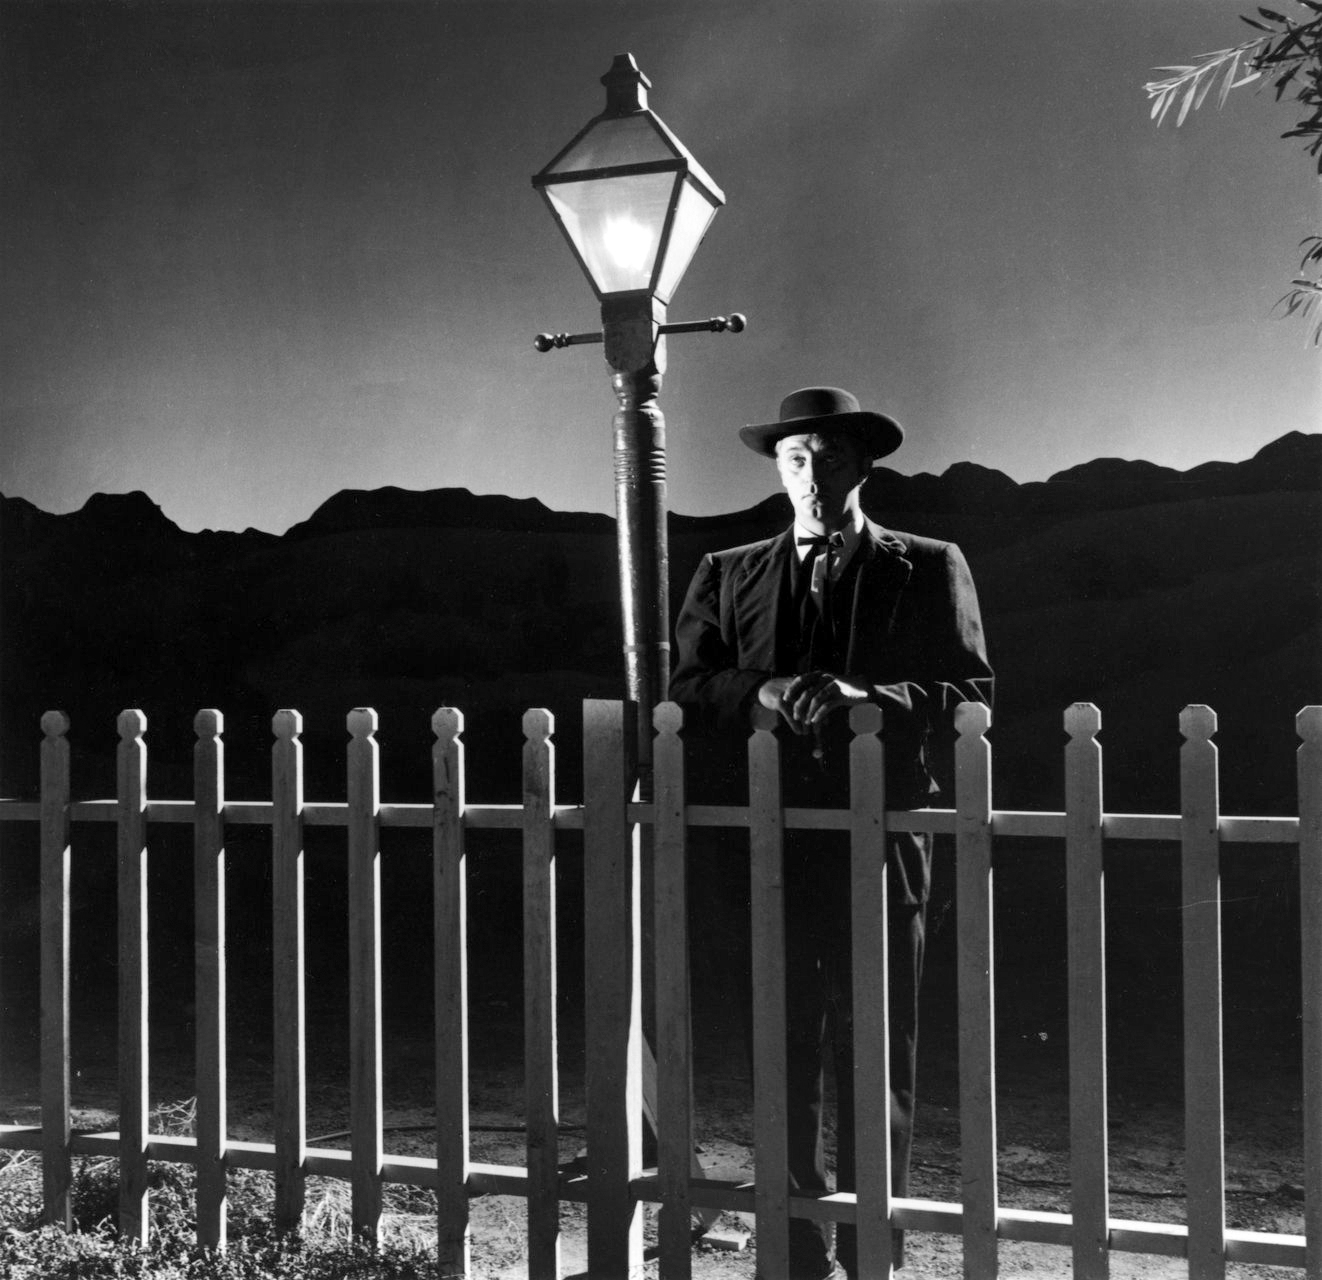 Robert Mitchum in The Night of the hunter